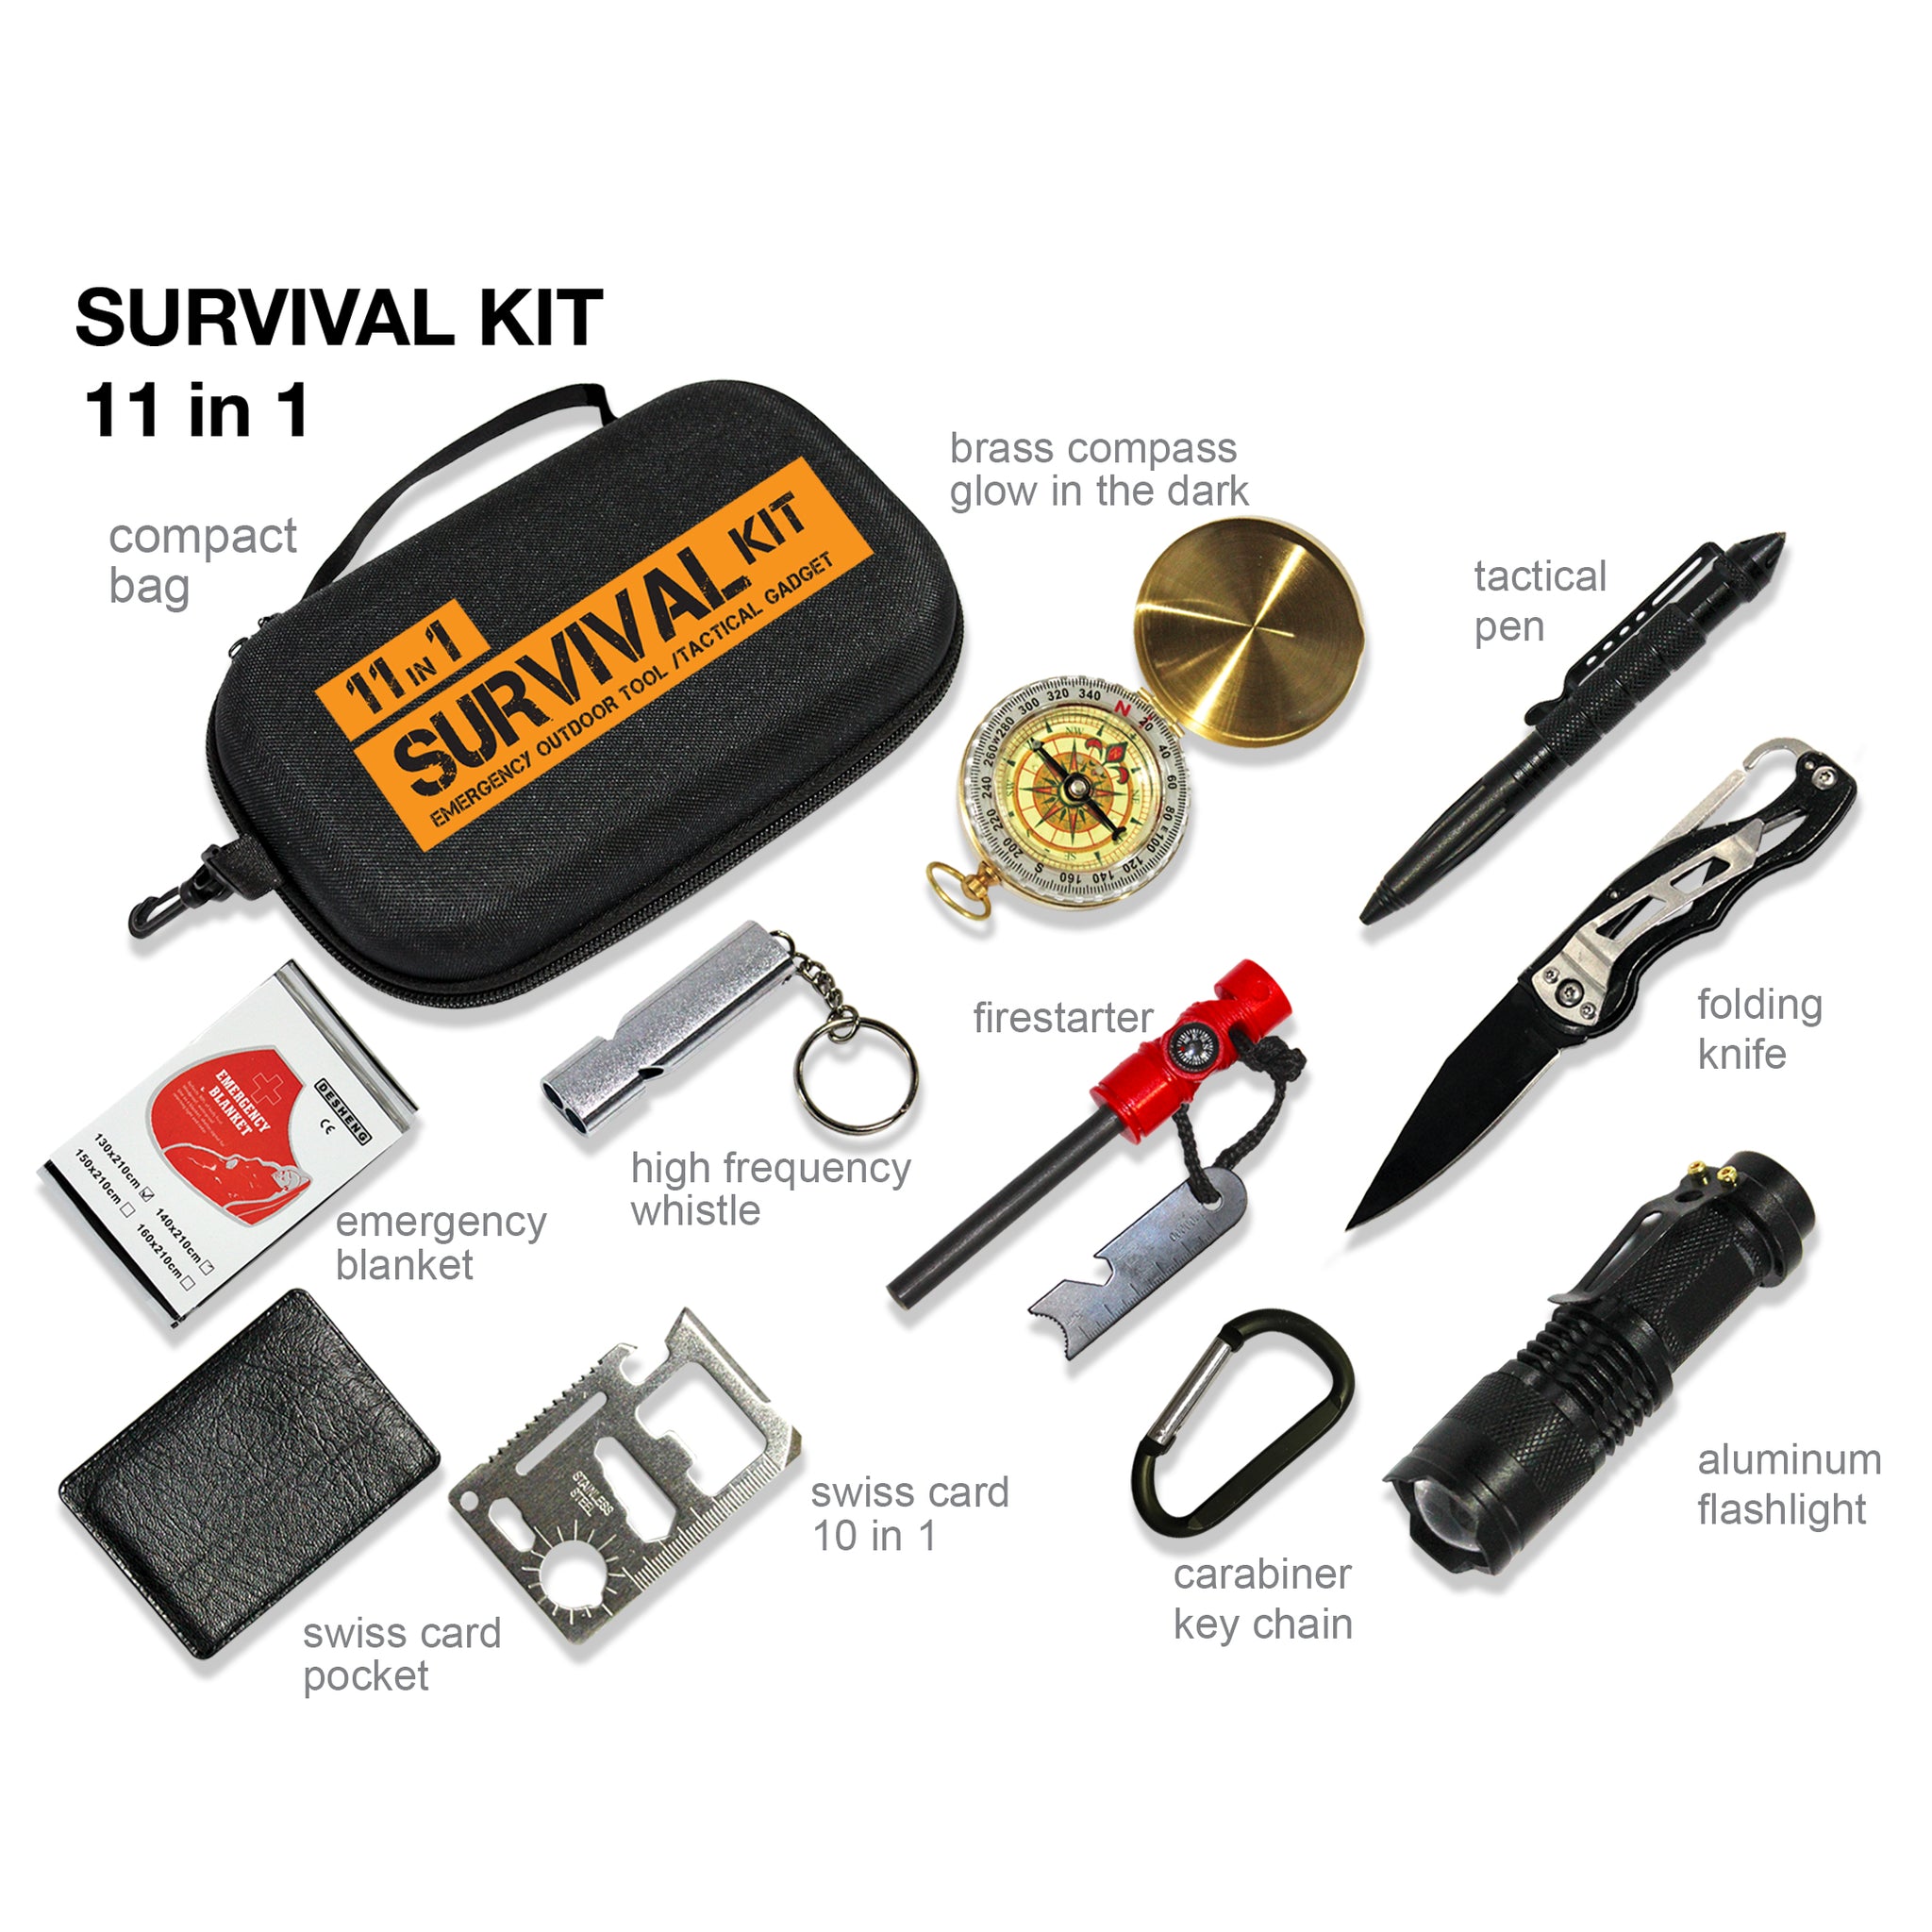 Camouflage - 11 in 1 Survival Kit